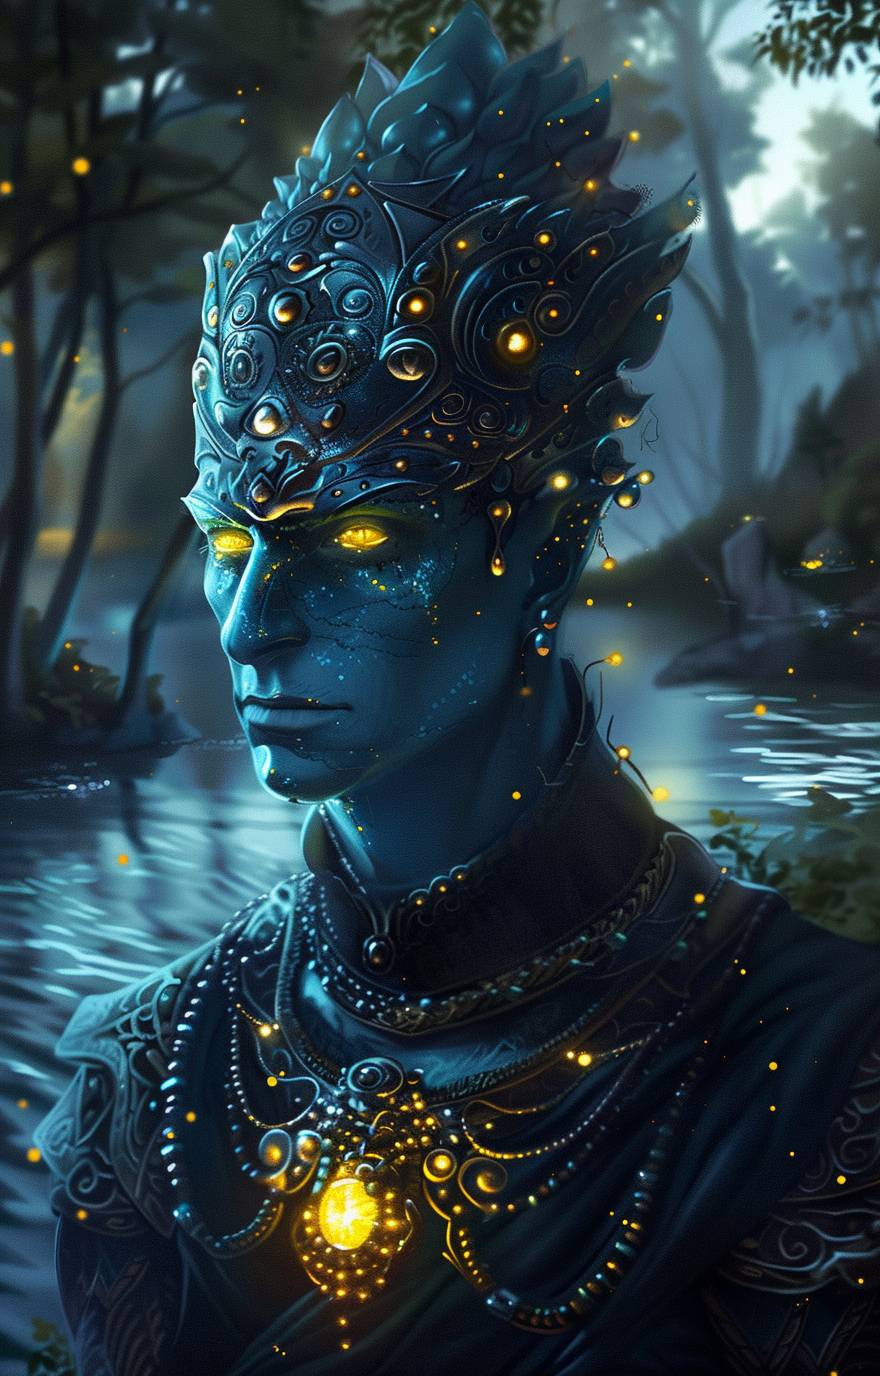 A blue-skinned humanoid with an elegant headpiece resembling the universe, glowing eyes and a yellow aura emanating from their chest, adorned in intricate silver jewelry and surrounded by trees. The background is dark with light reflections on water, creating a mystical atmosphere.